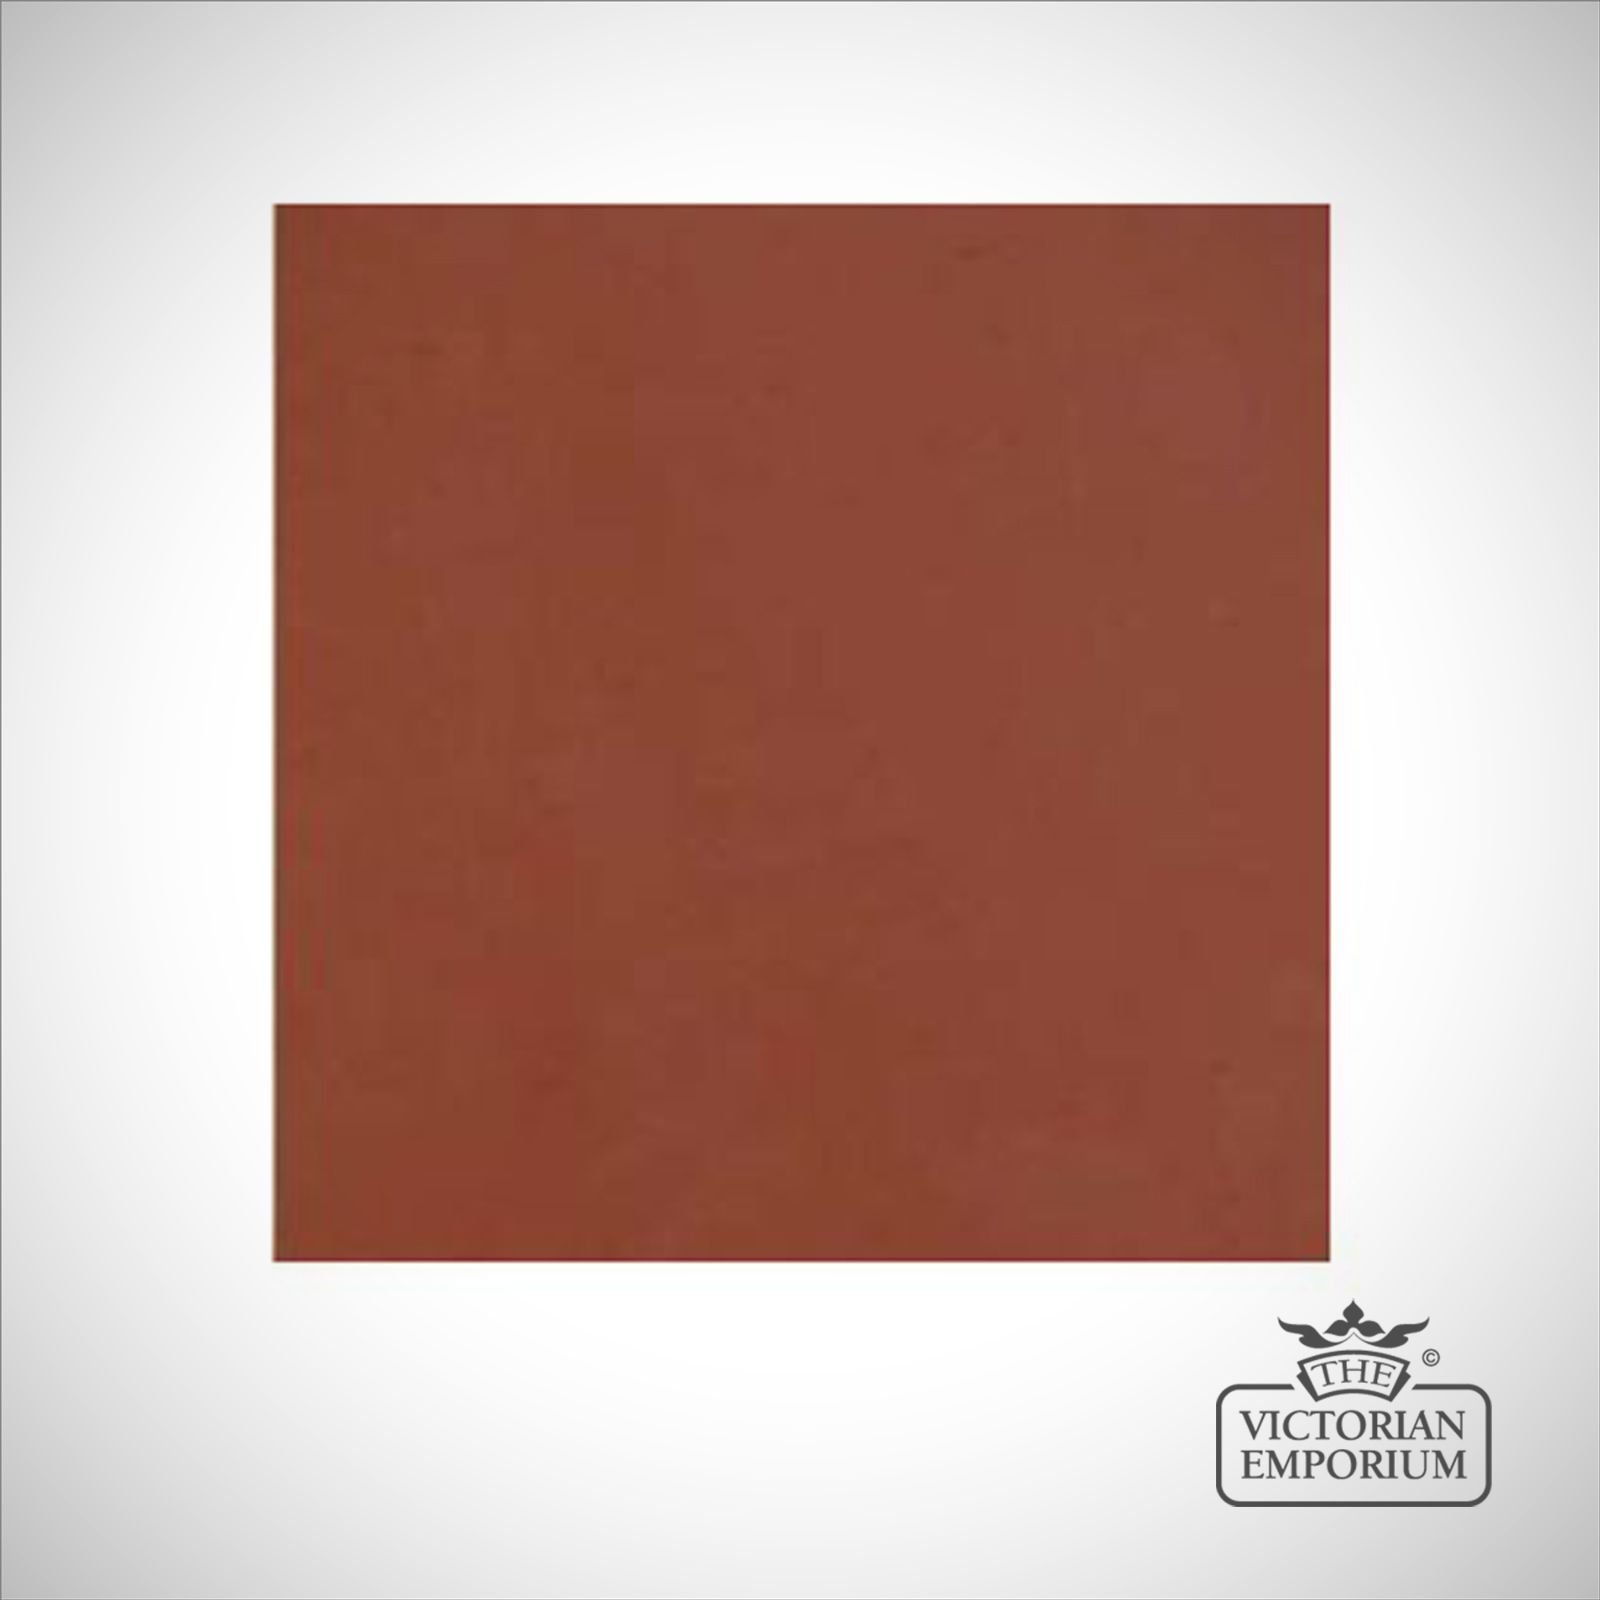 Basic Red Floor Tile - interior or exterior use